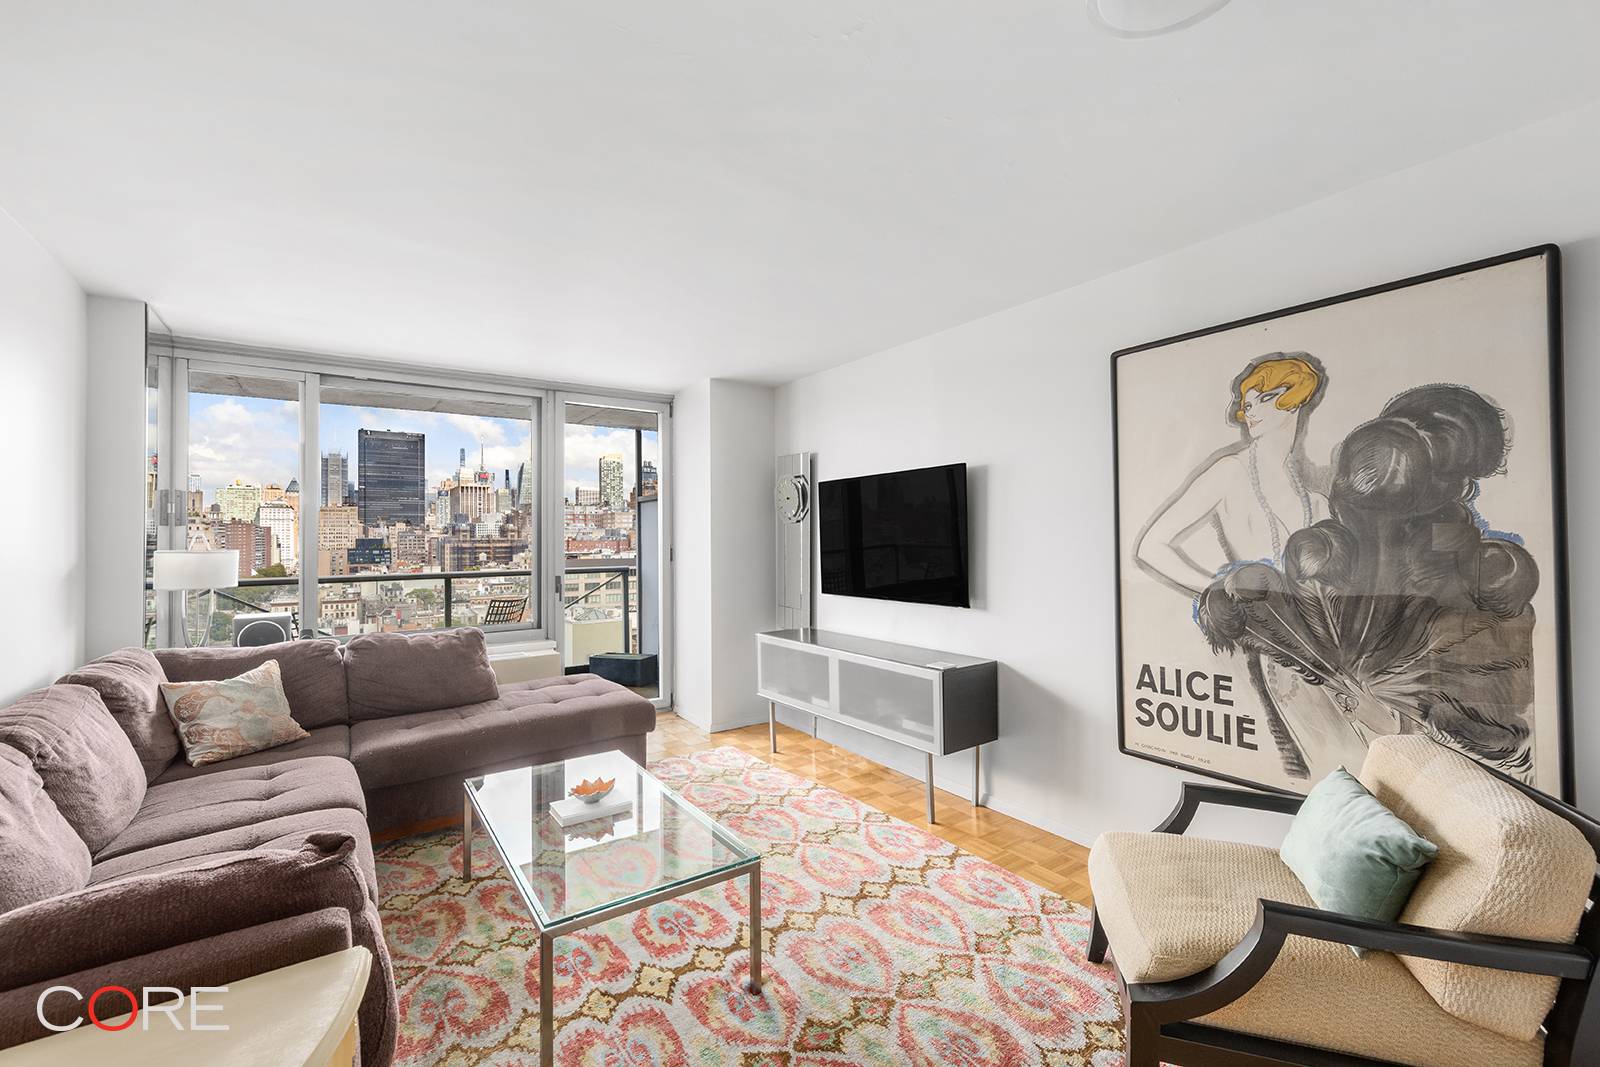 Located at the Grand Chelsea, this light filled one bedroom, one bath apartment features a private terrace, high ceilings, and magnificent northern exposures with dramatic open city views.